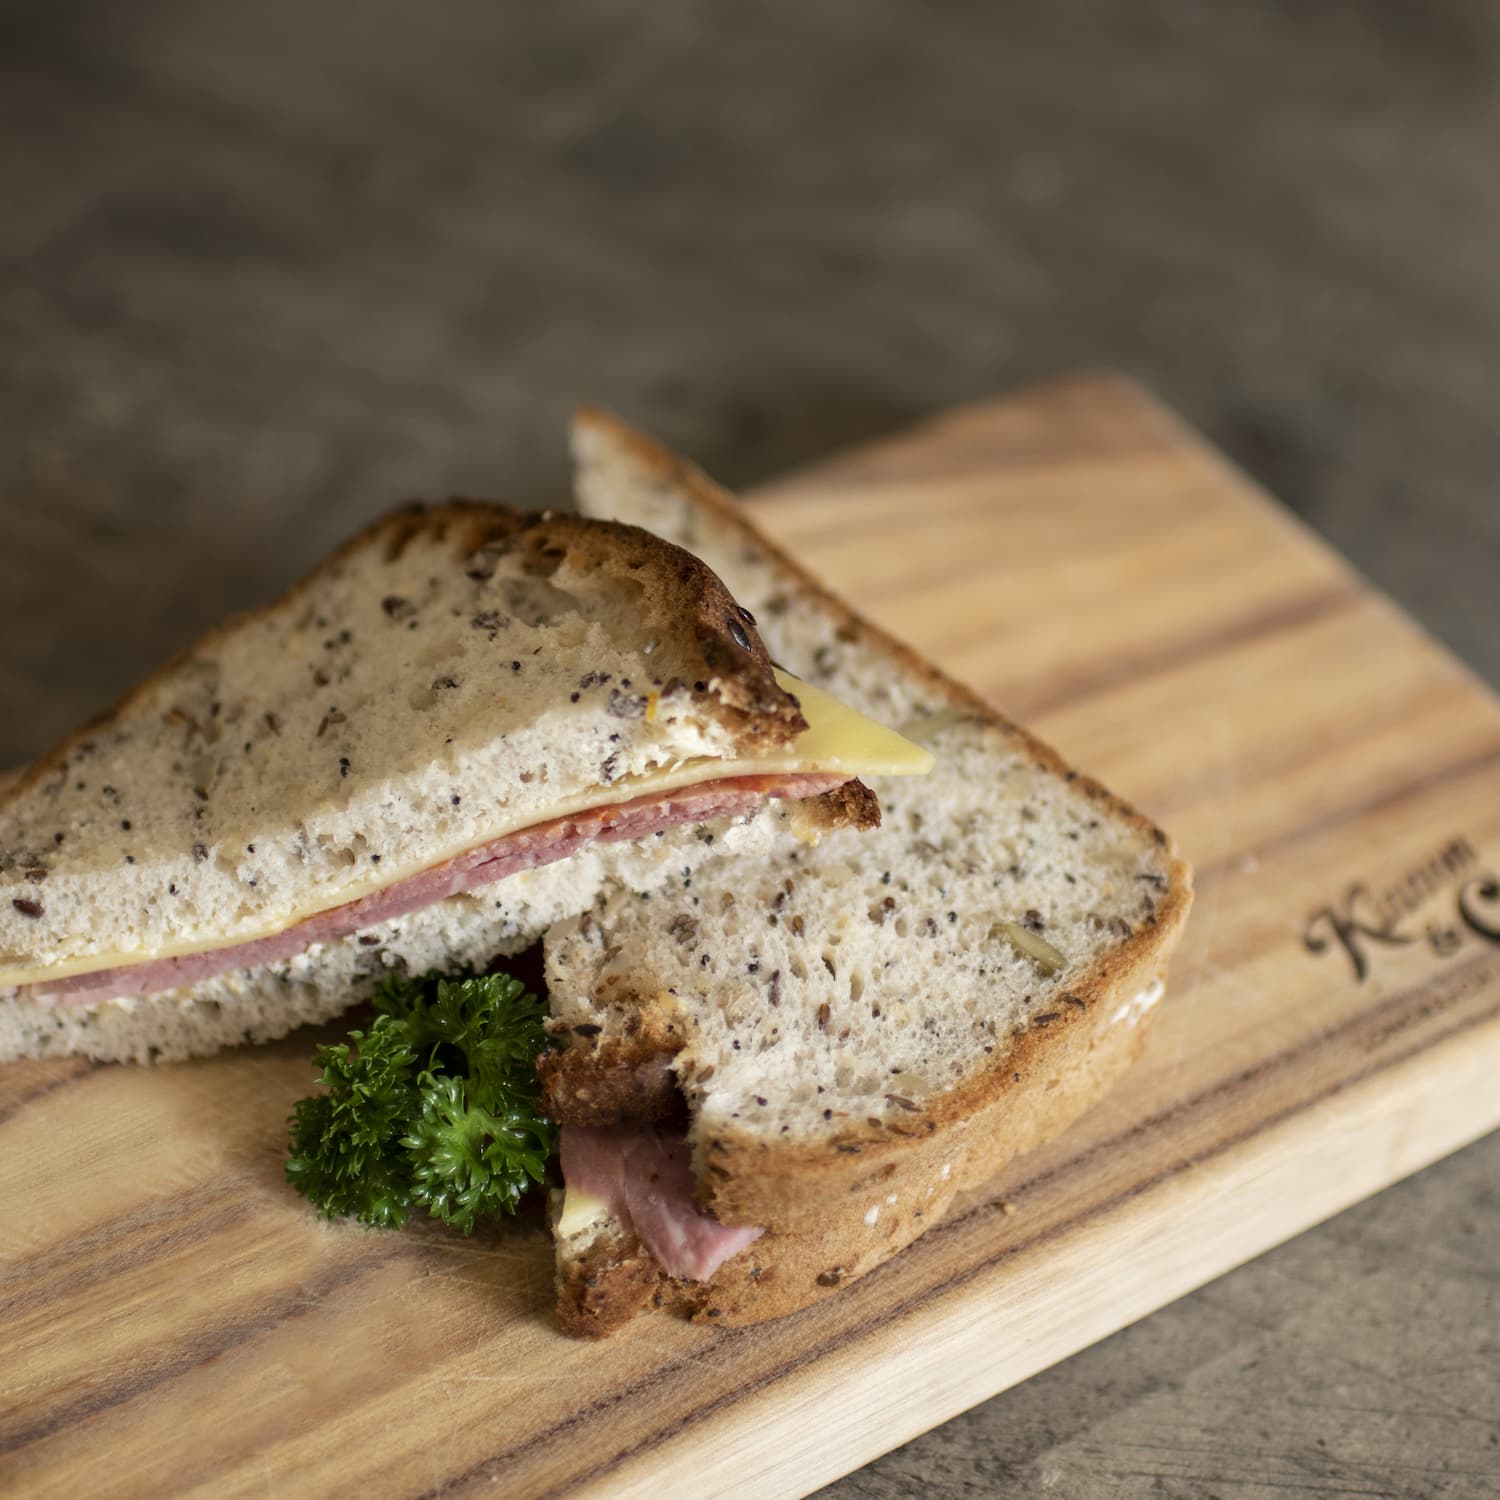 Corned meat and cheese sandwich on timber board